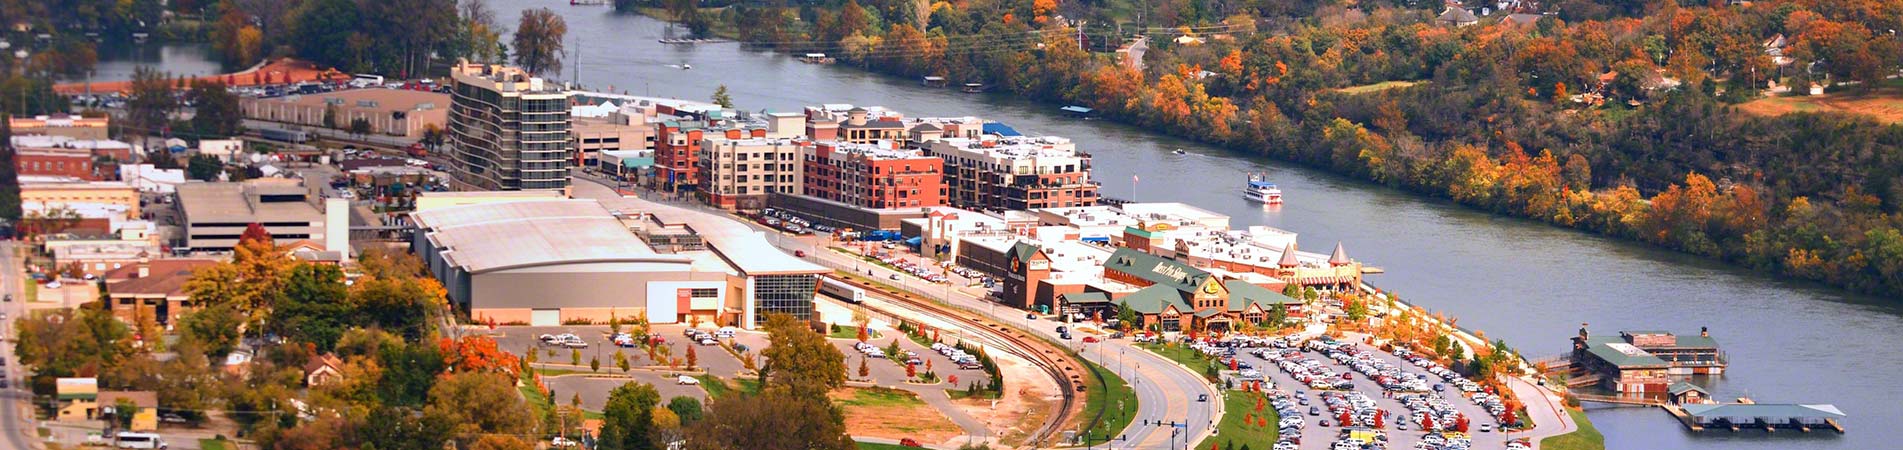 What Branson Landing looks like if you view it from the sky.